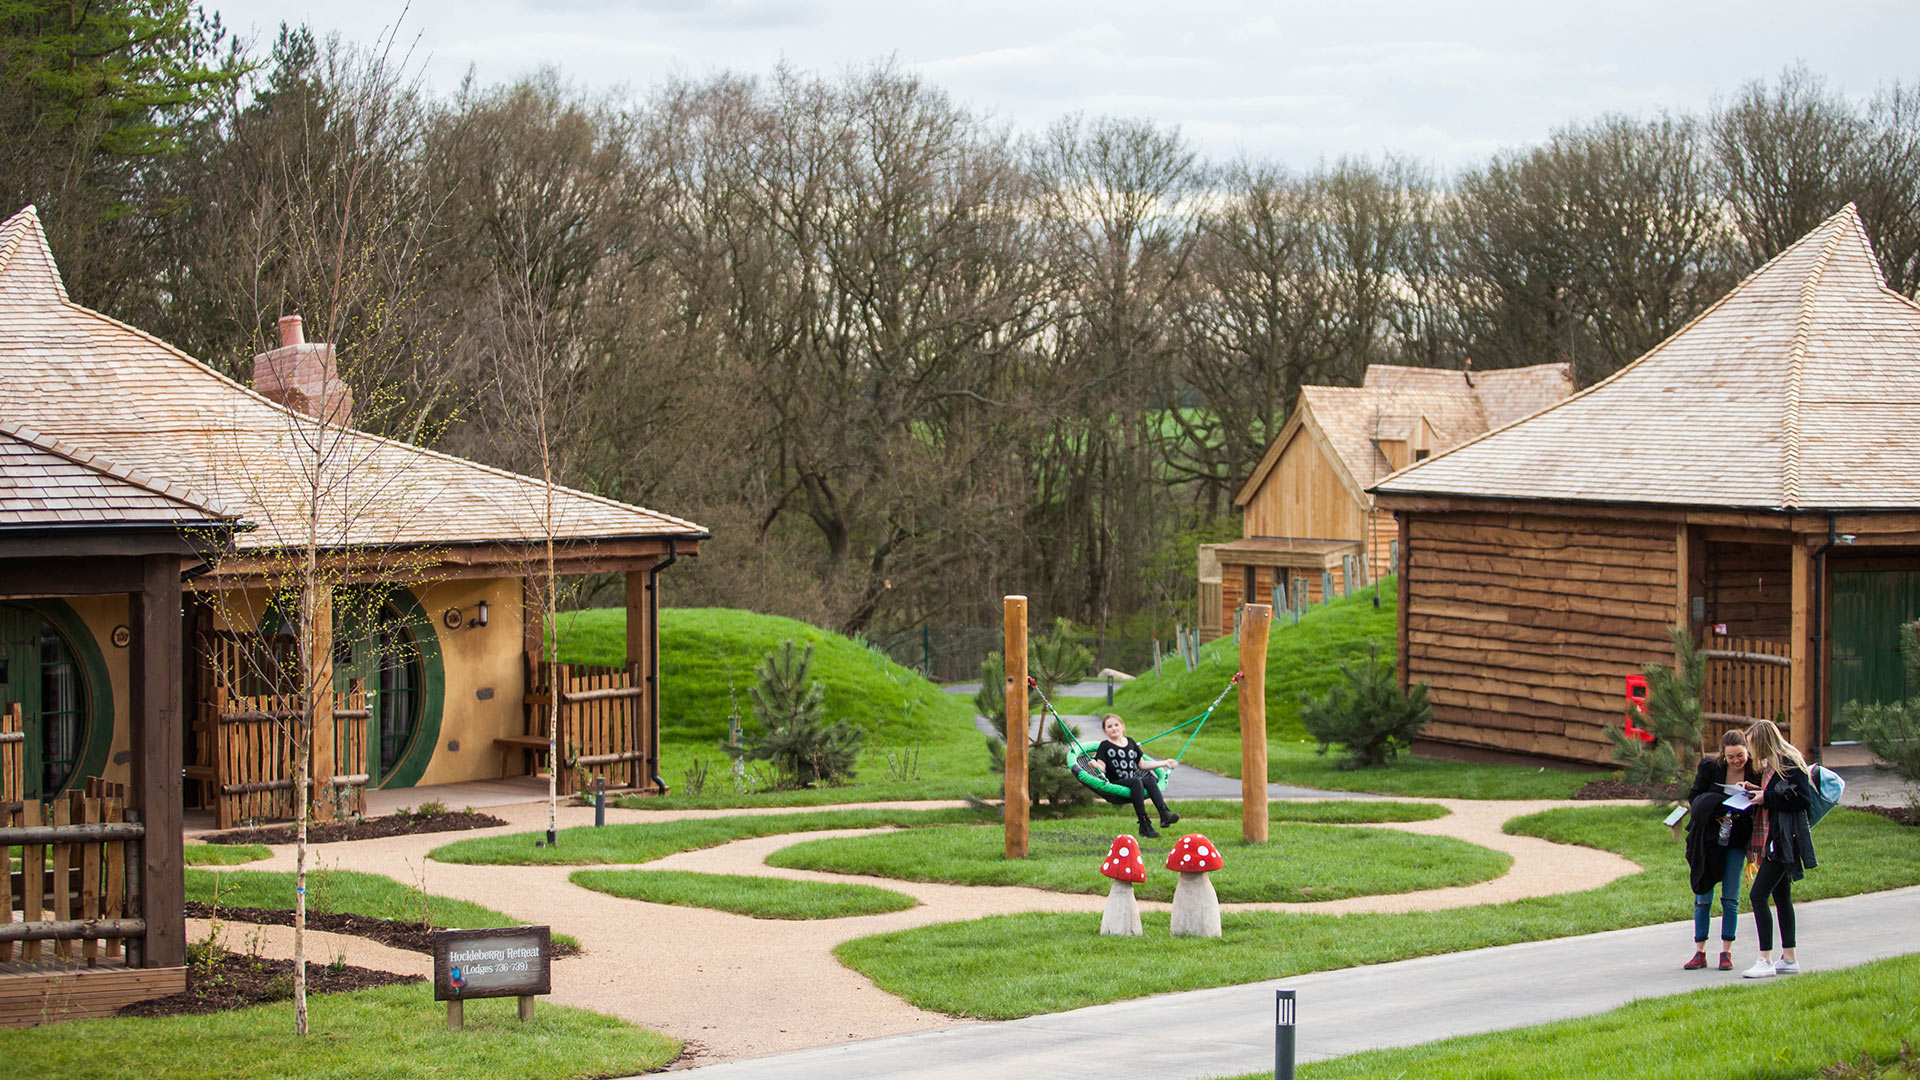 The Enchanted Village Lodges at the Alton Towers Resort